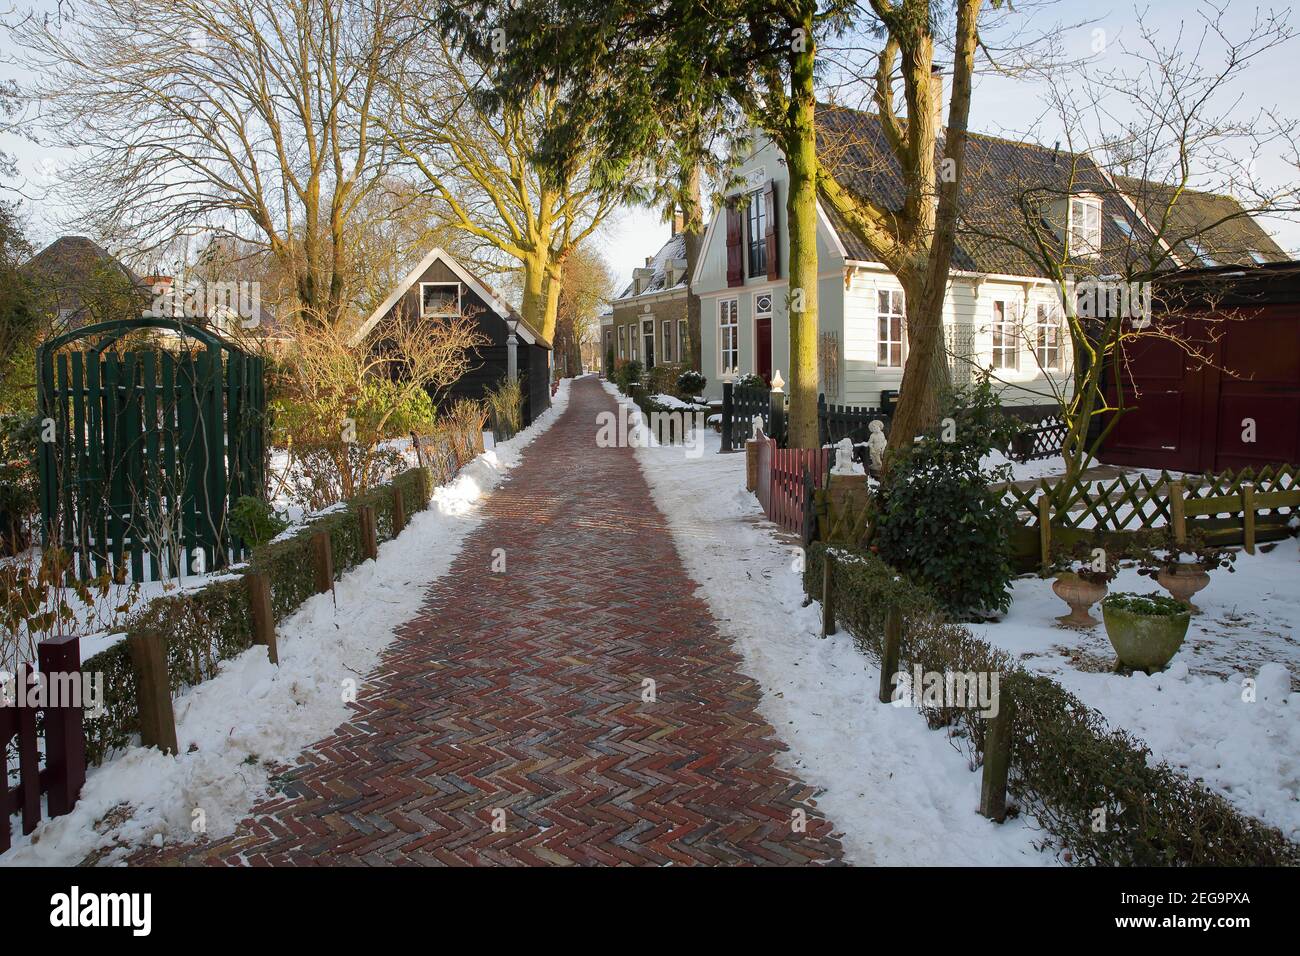 Winter snow in Broek in Waterland, a small town with traditional old and painted wooden houses, North Holland, Netherlands. Stock Photo